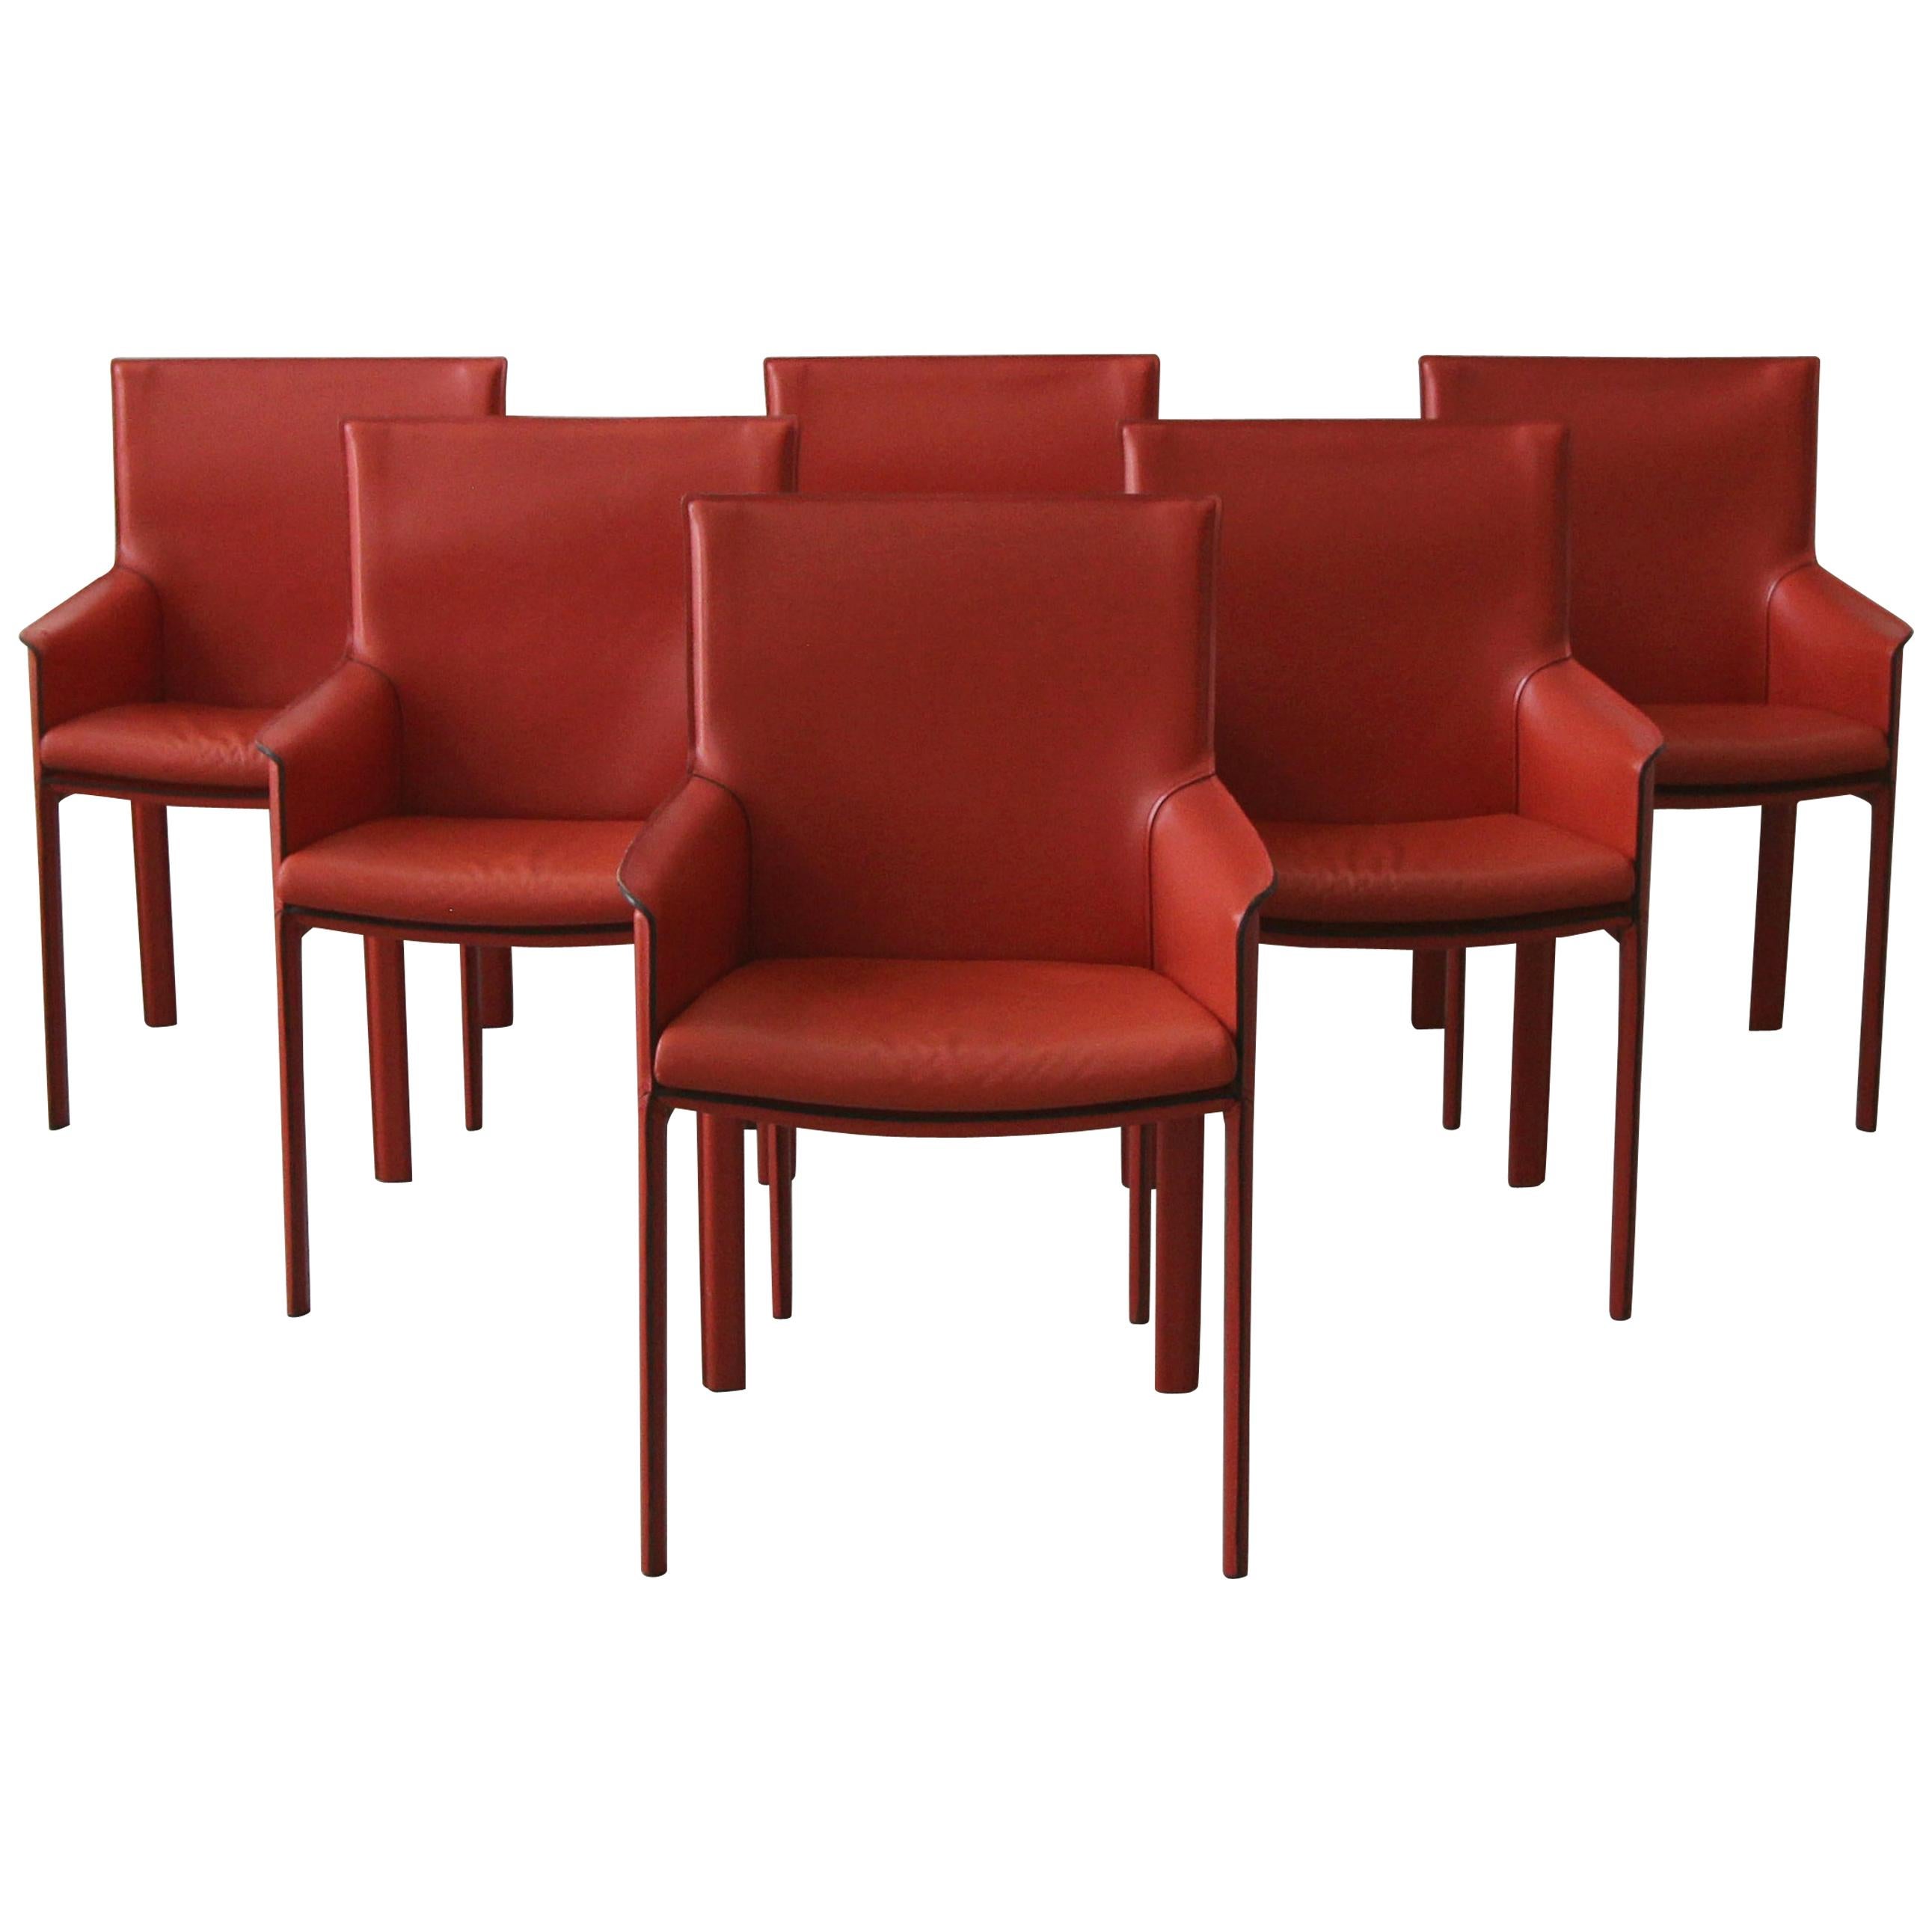 Set of 6 Orange Italian Leather Dining Chairs by Enrico Pellizzoni